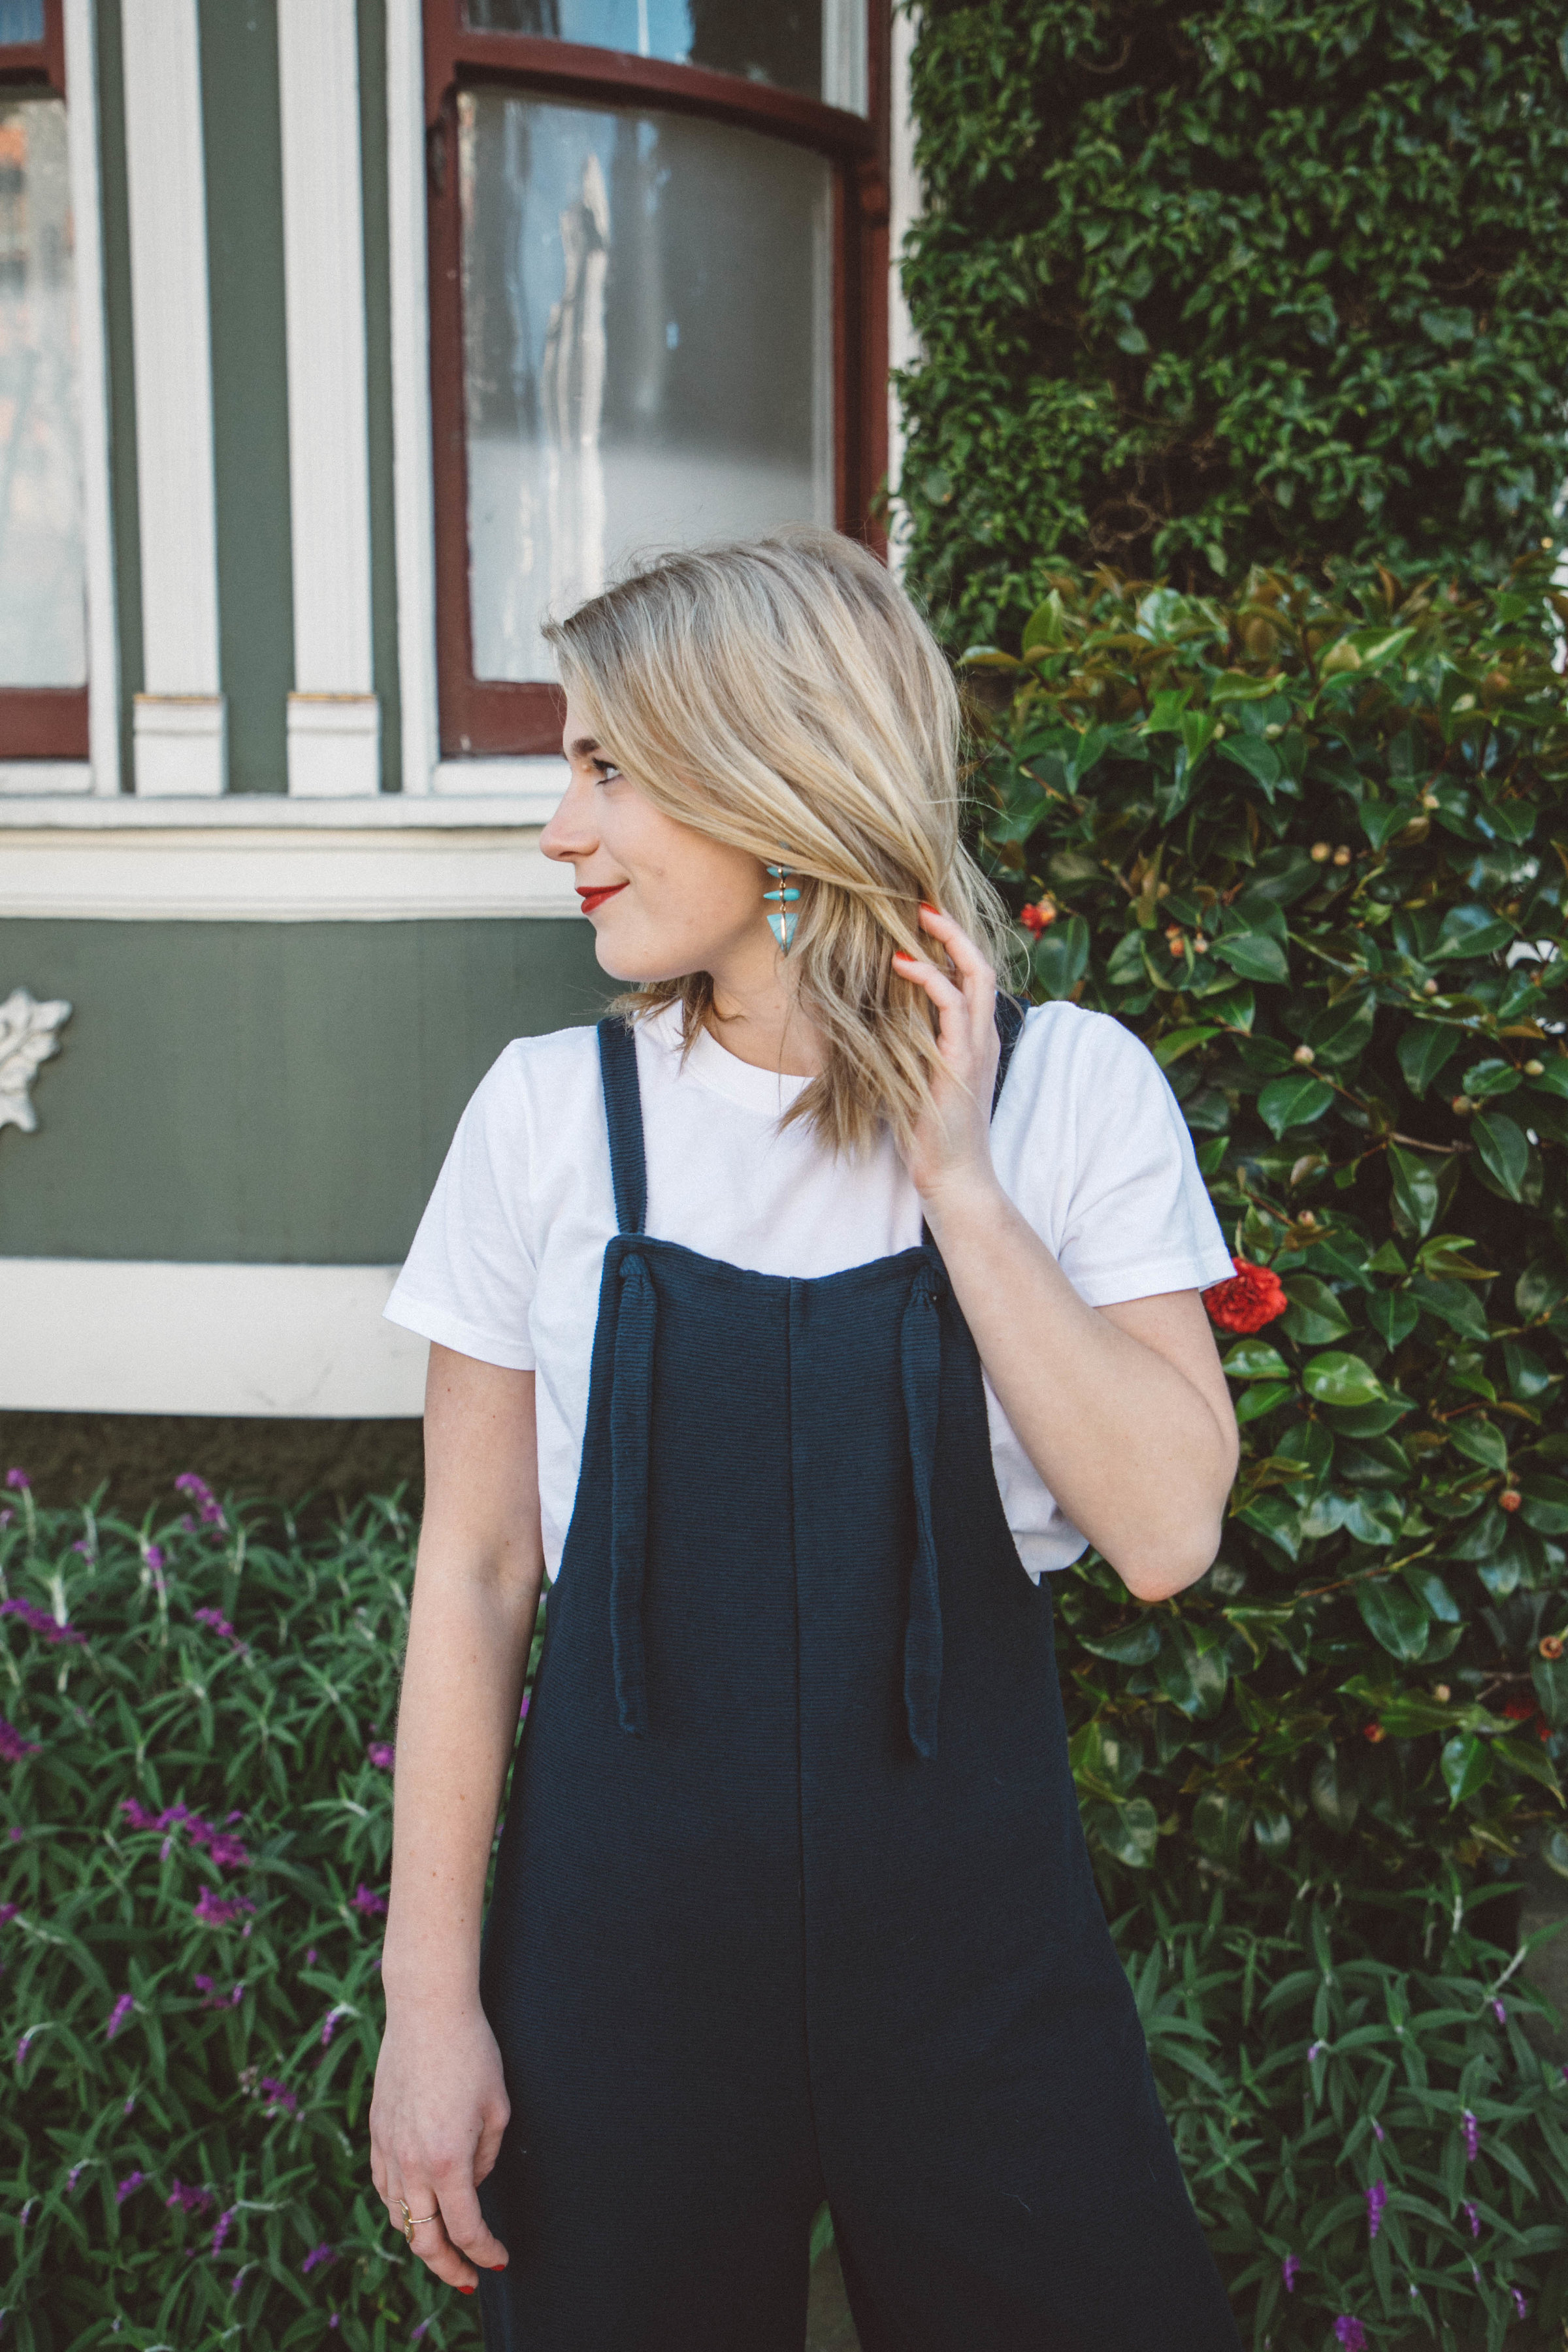 All About The Jumpsuit // A knit Madewell jumpsuit dresses up a classic Everlane white tee for an easy, everyday look.